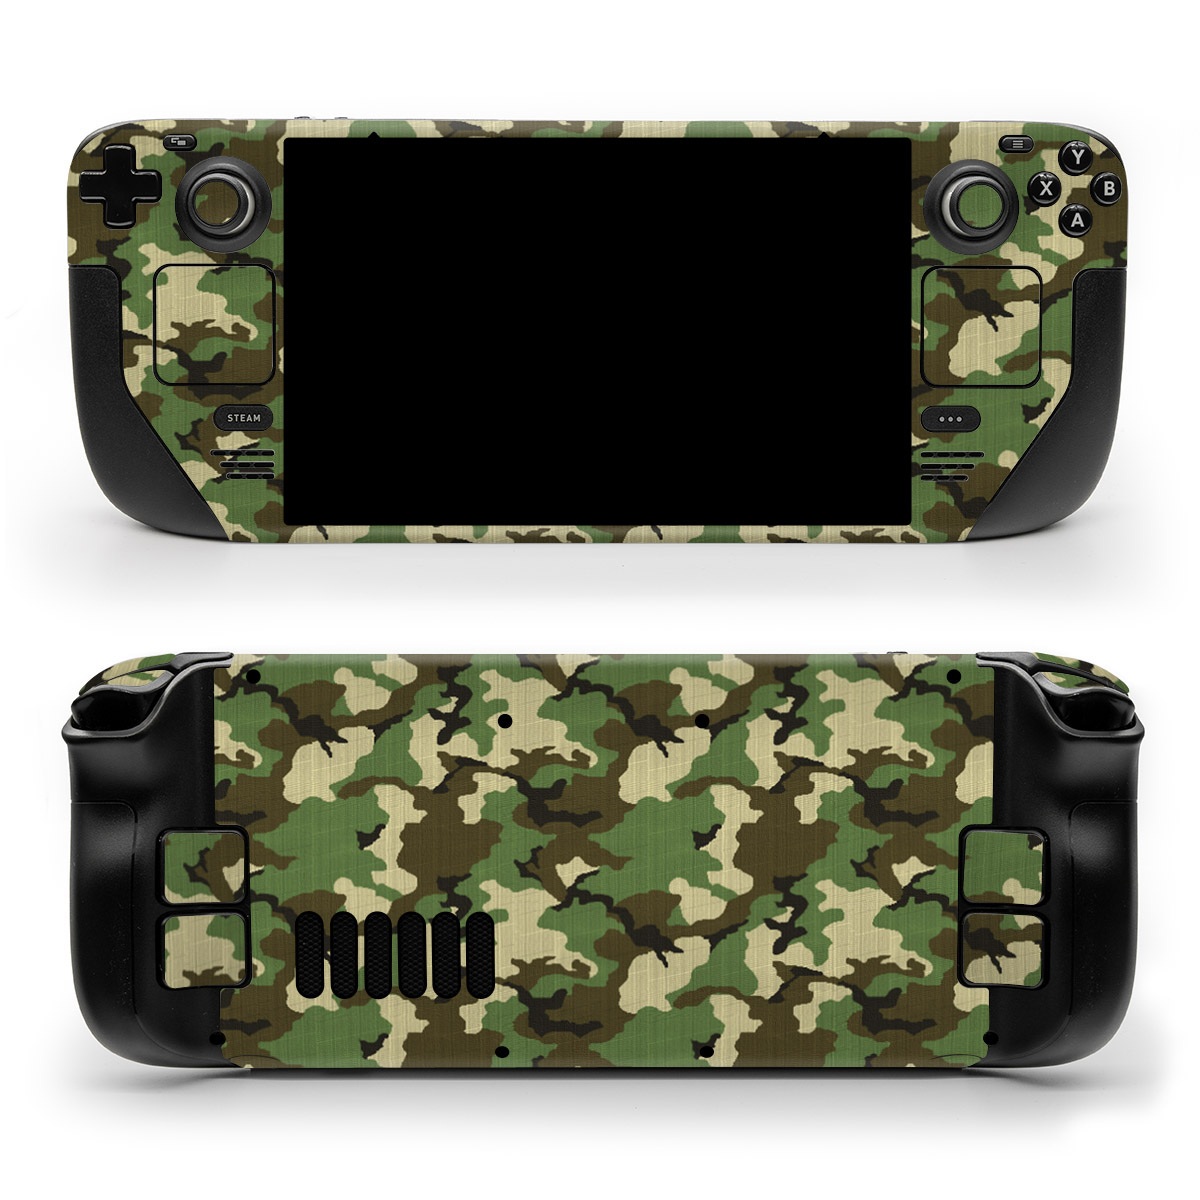 Valve Steam Deck Skin design of Military camouflage, Camouflage, Clothing, Pattern, Green, Uniform, Military uniform, Design, Sportswear, Plane, with black, gray, green colors